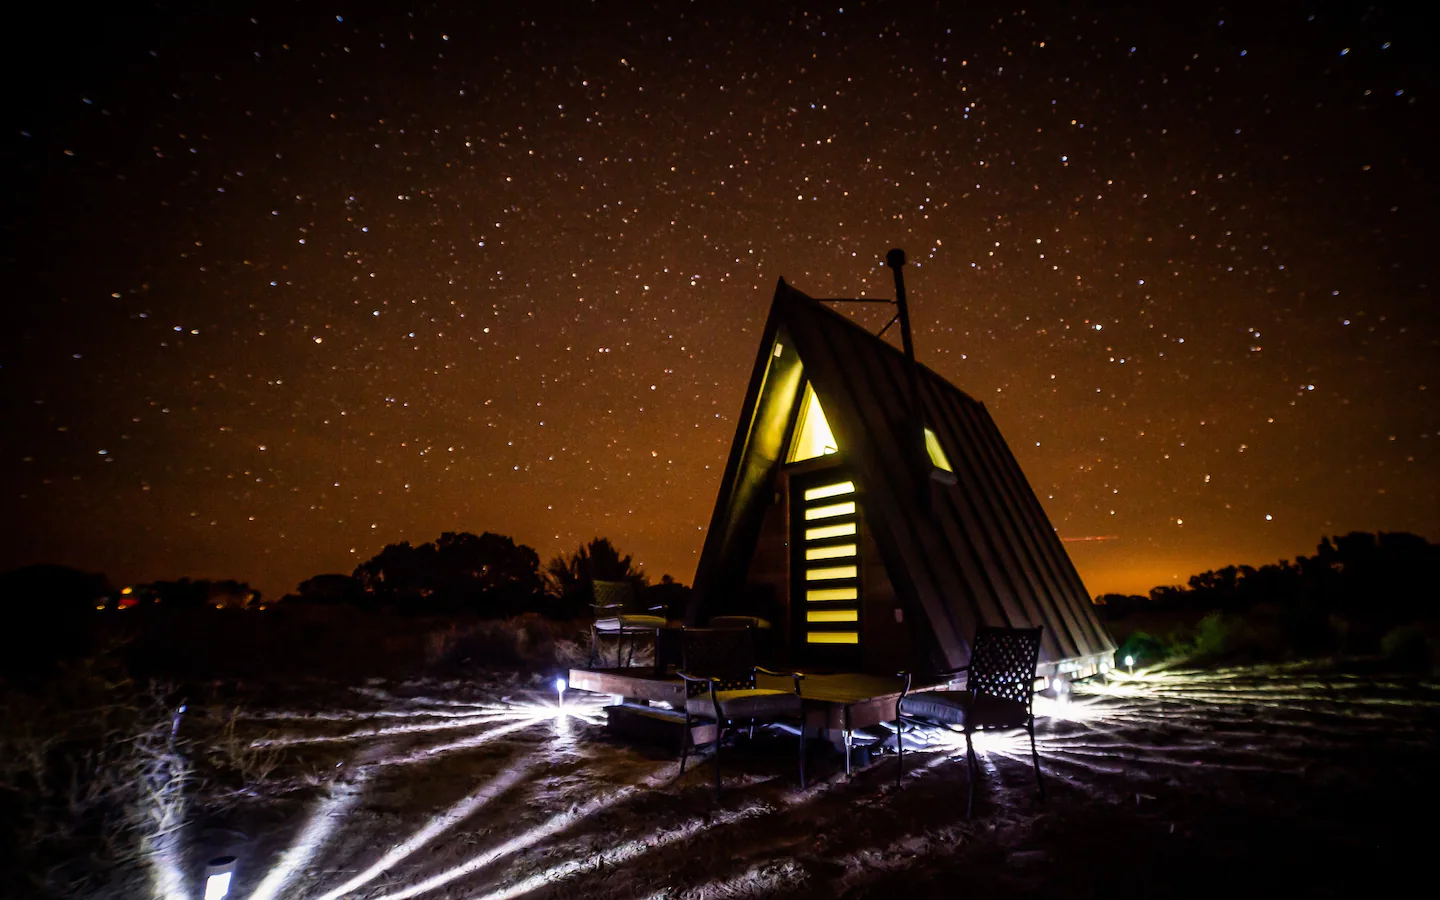 A-Frame Cabin Glamping Grand Canyon